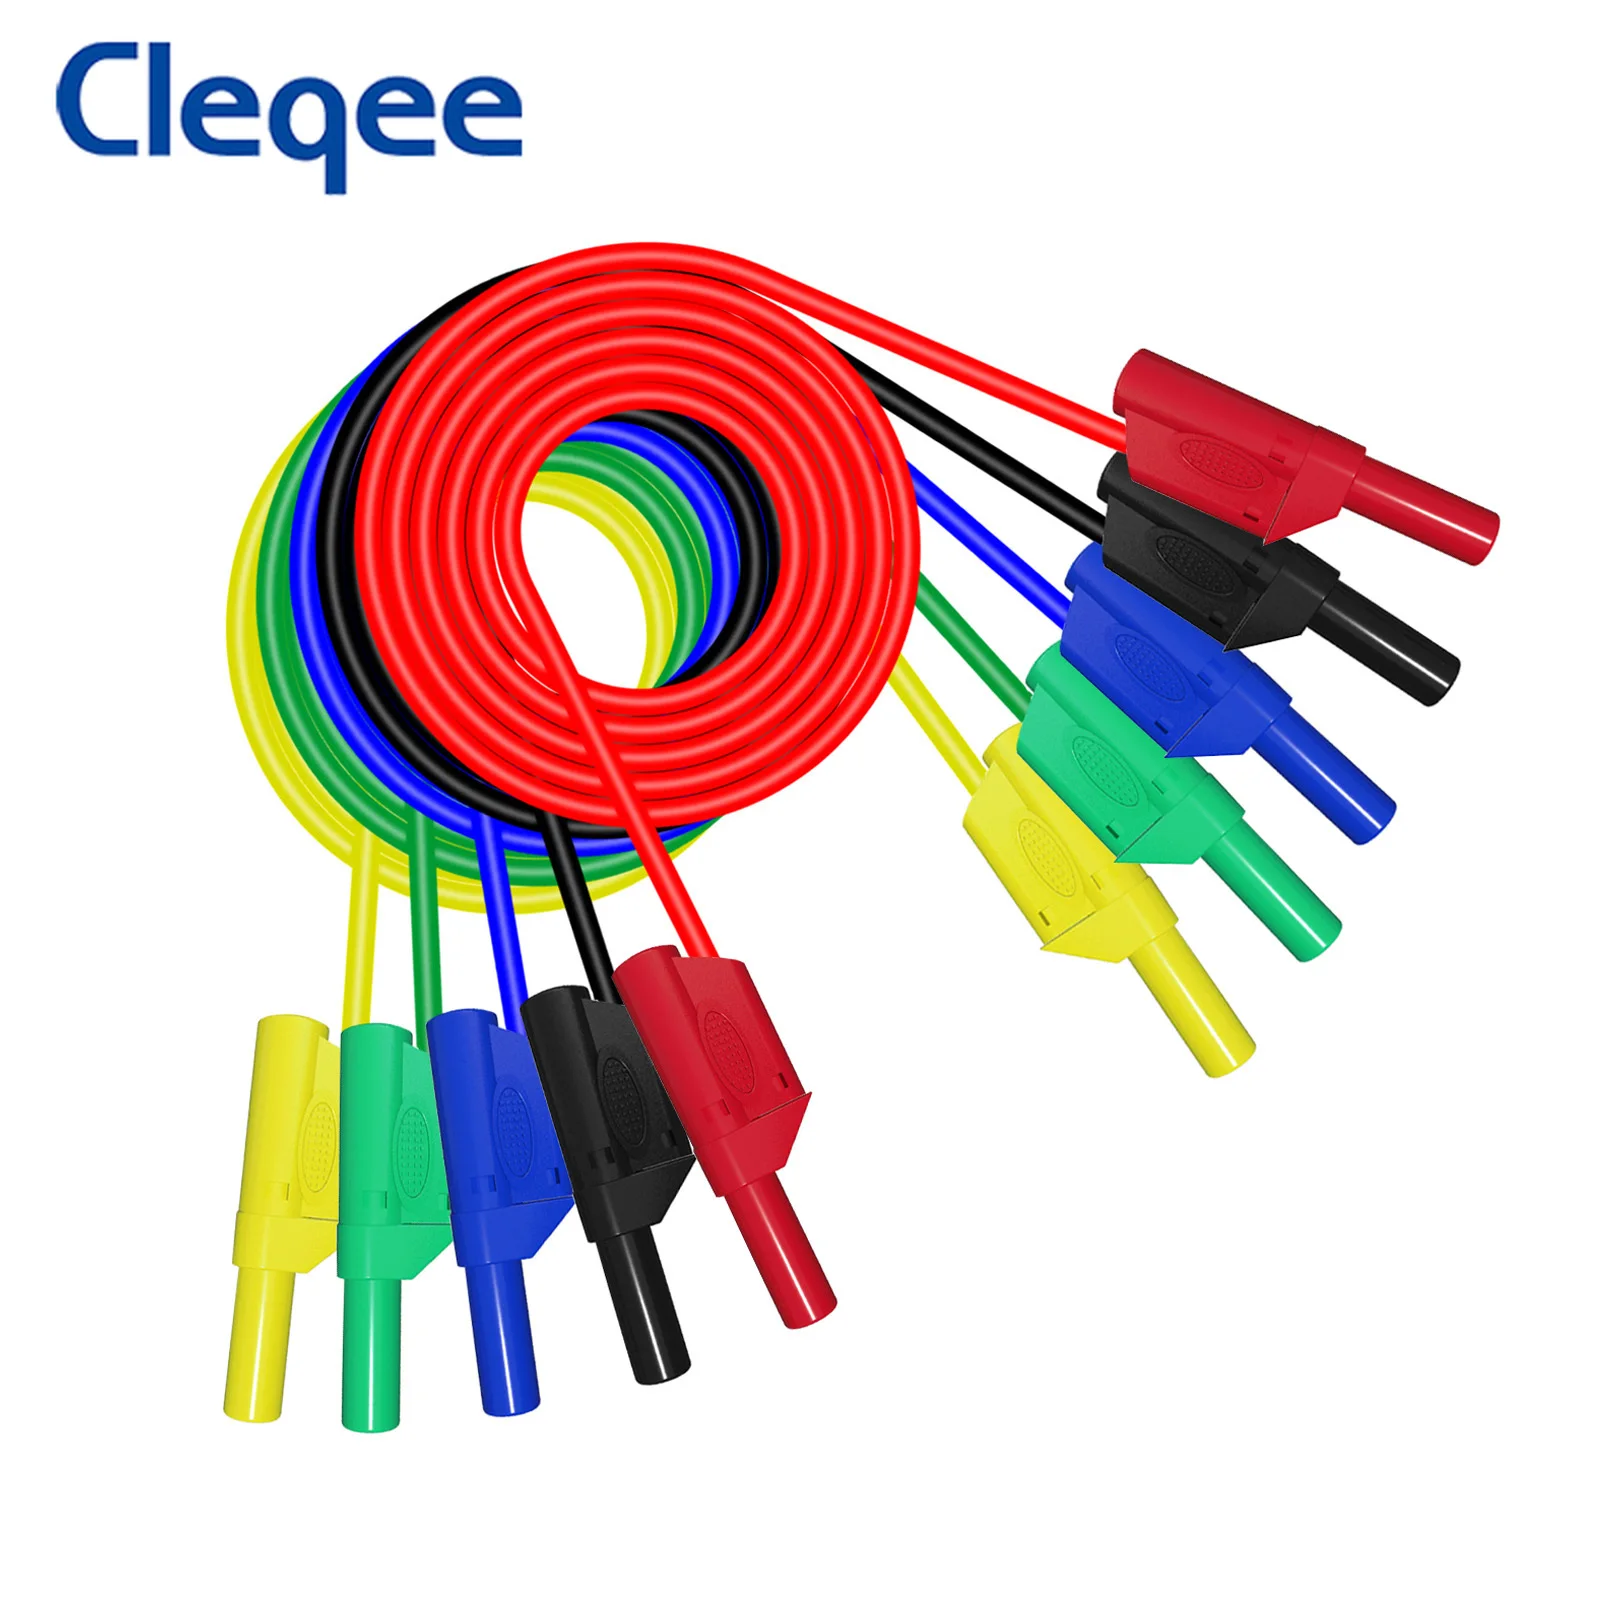 Cleqee P1050 4mm Banana Plug to 4mm Banana Plug Multimeter Test Leads Soft PVC Cable Copper Wire 5 Color 1M